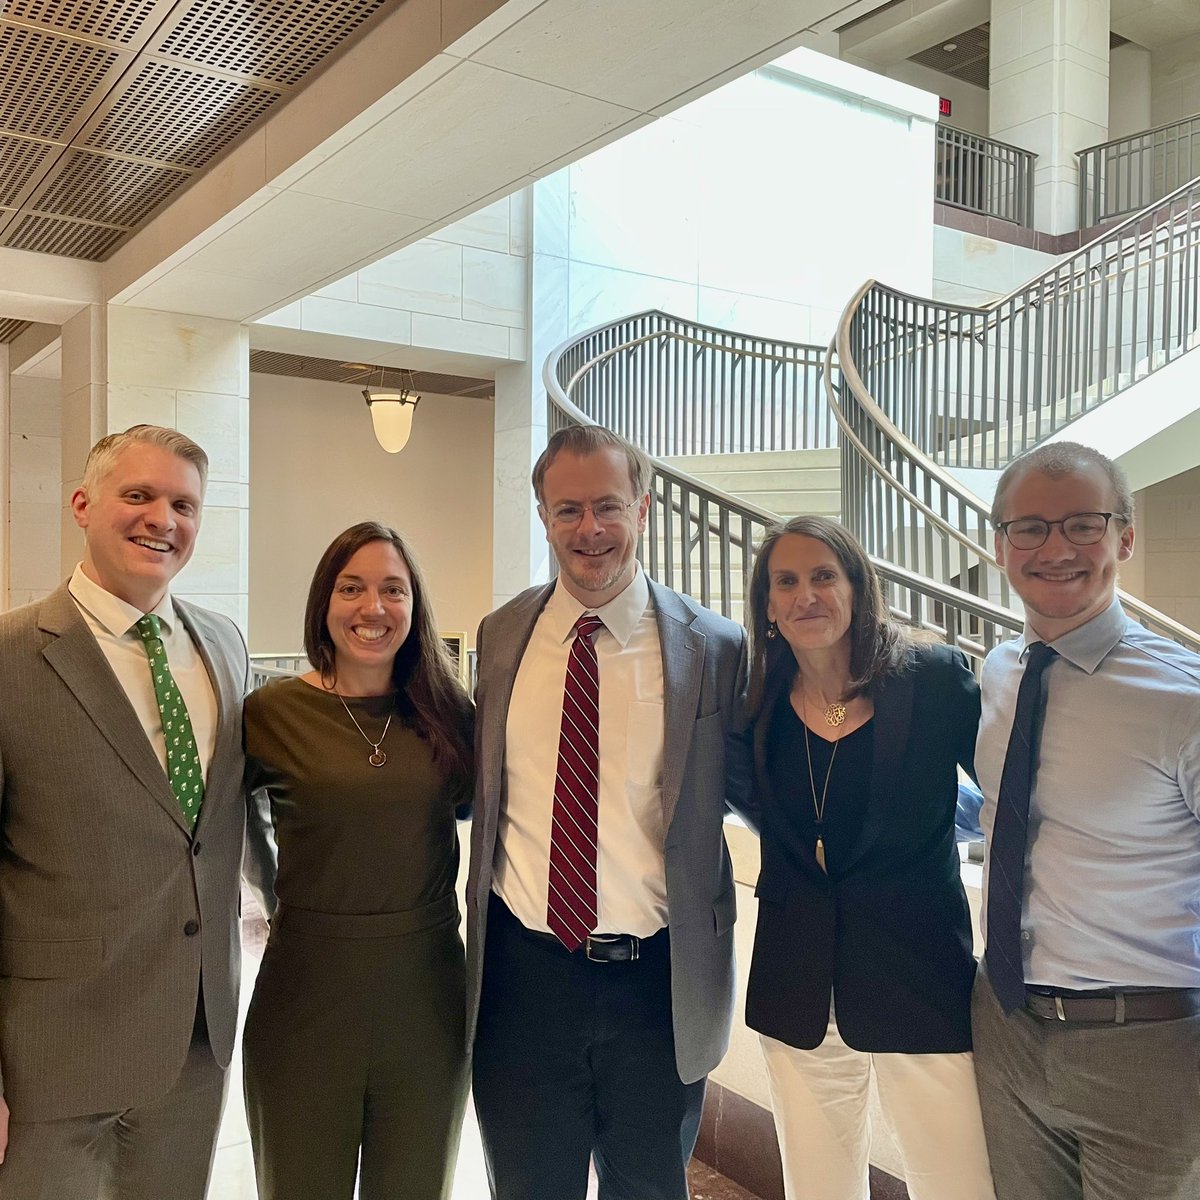 Meet the ‘Emergency Expense Avengers’! 🦸‍♀️ 🦸‍♂️ We’re on a mission to stop emergency spending abuse and restore responsible fiscal norms in Congress. @veroderugy @KurtCouchman @DavidADitch @LettDominik @mercatus @Heritage @CatoInstitute @AFPhq